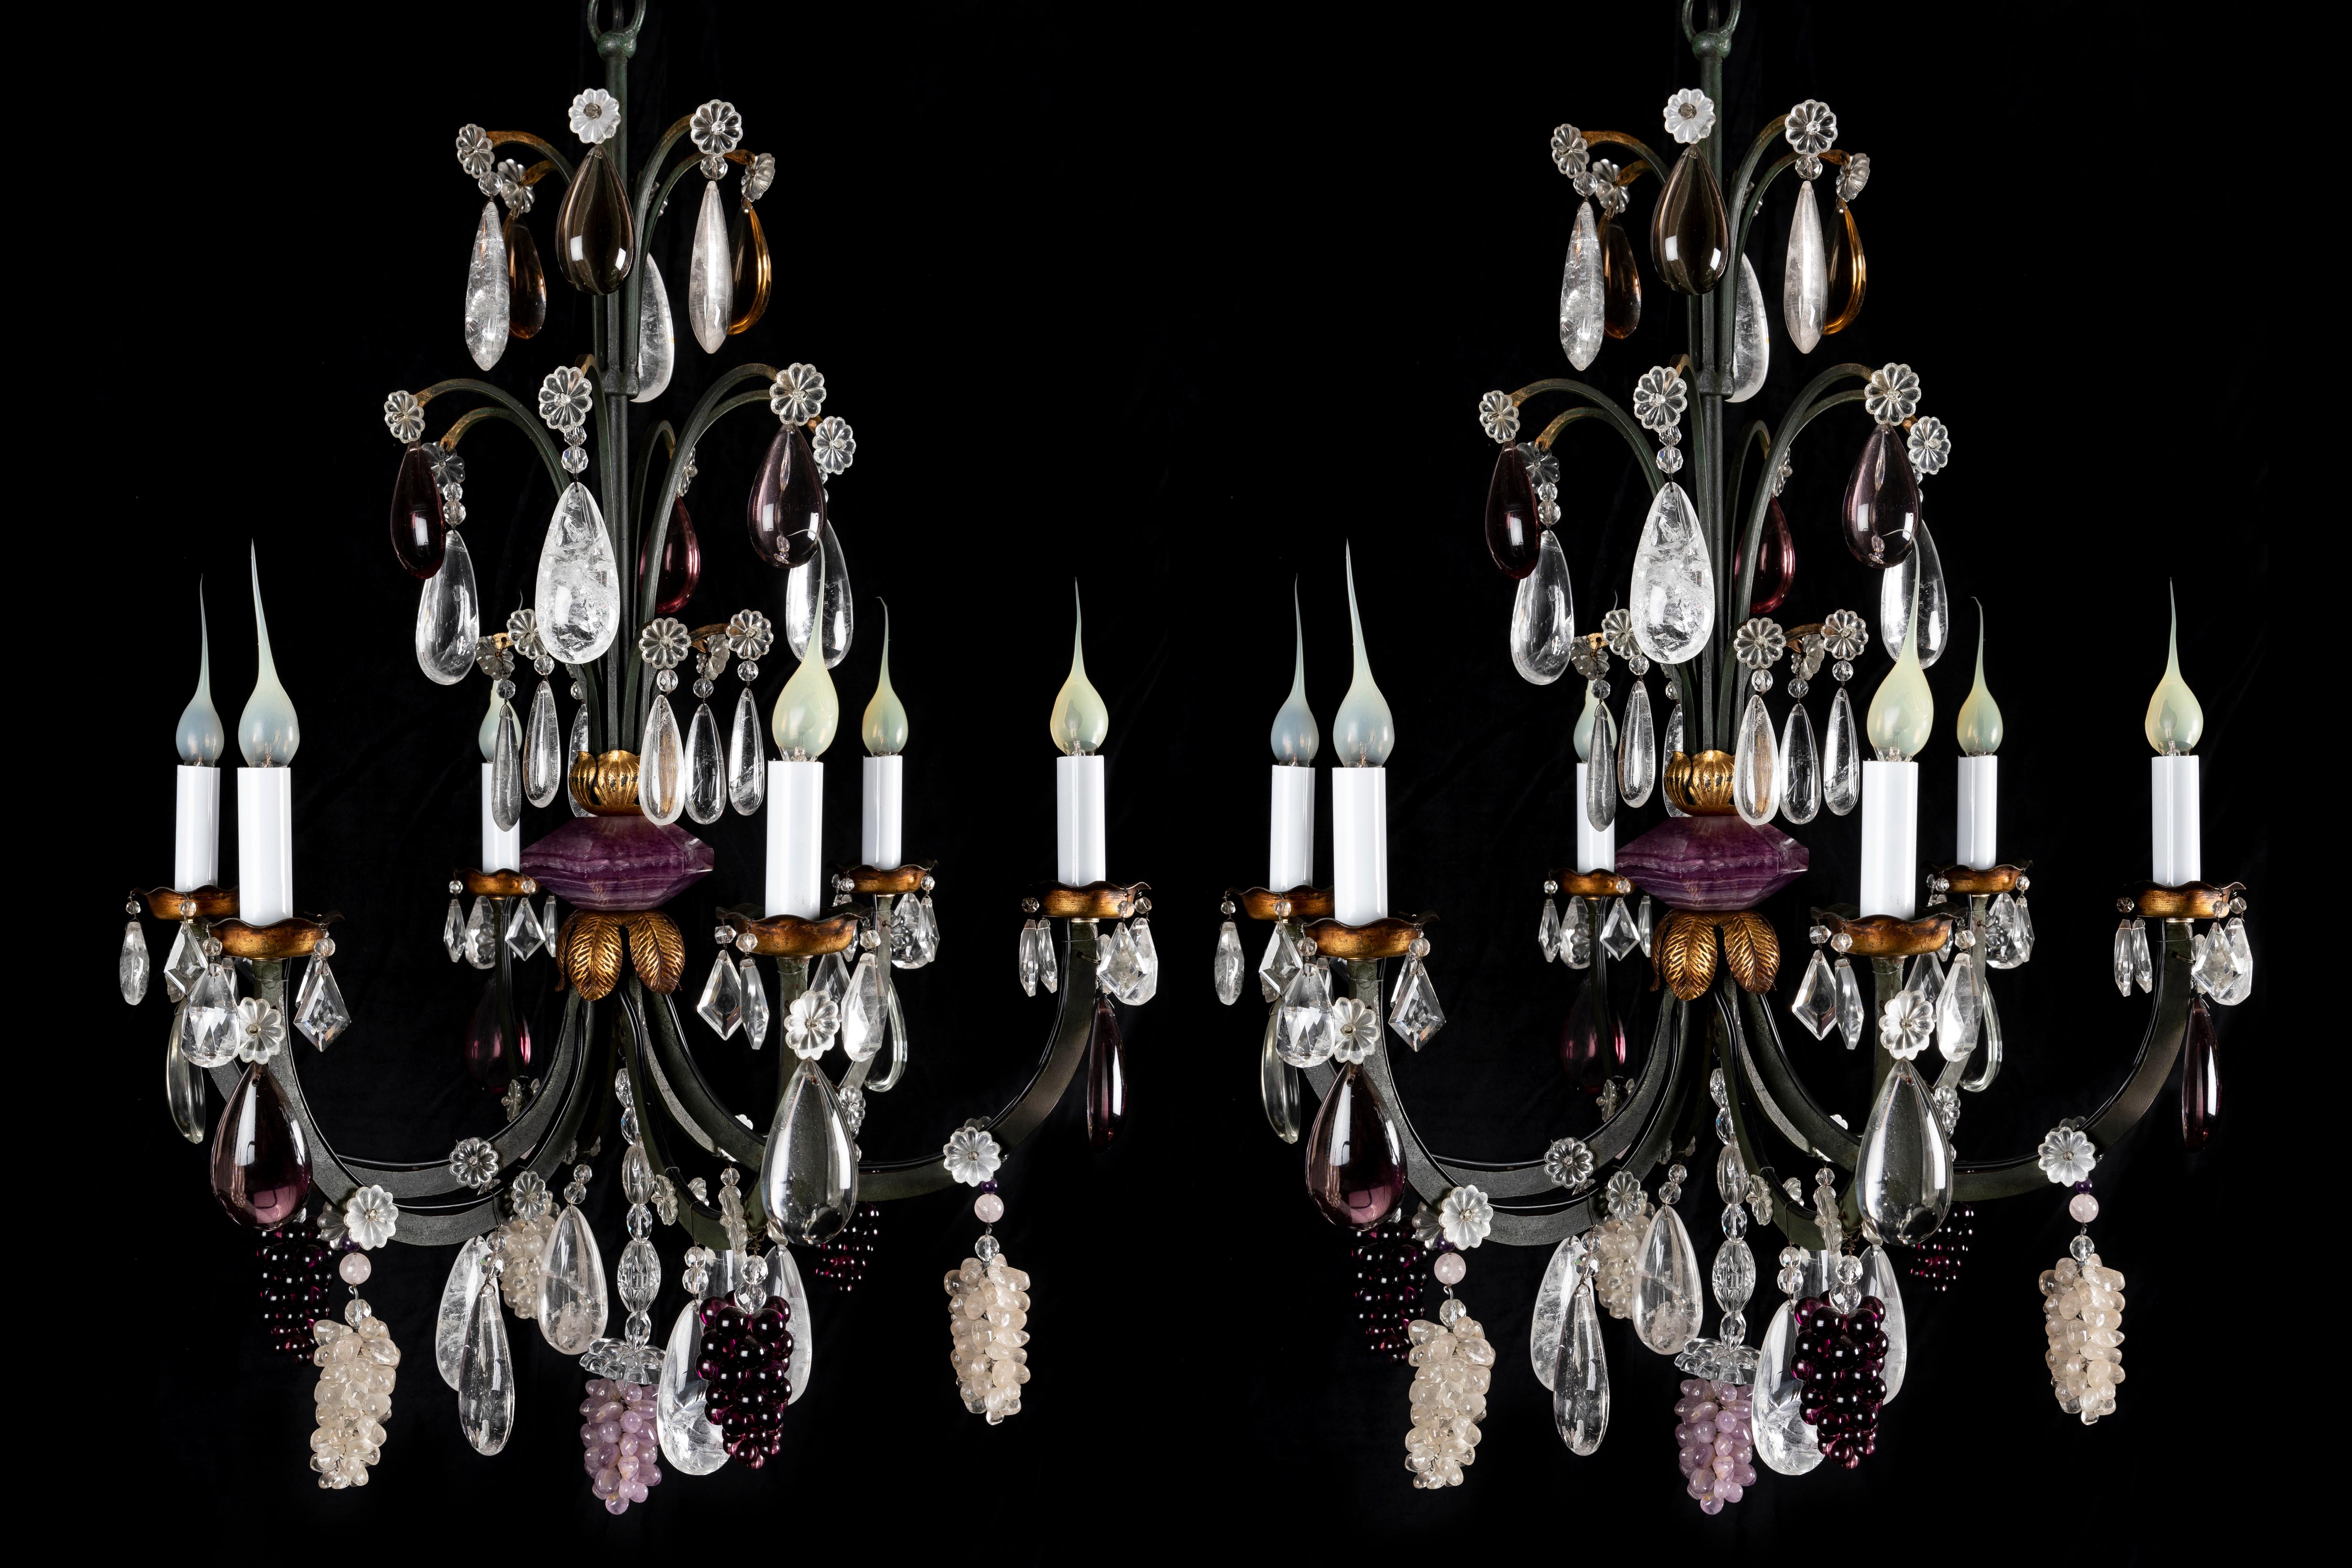 A Pair of Unusual French Bagues Style green patinated bronze and cut rock crystal fruit chandeliers of exquisite detail. This pair of fine chandeliers are embellished with cut rock grapes, amethyst rock crystal grapes, amethyst glass grapes, further